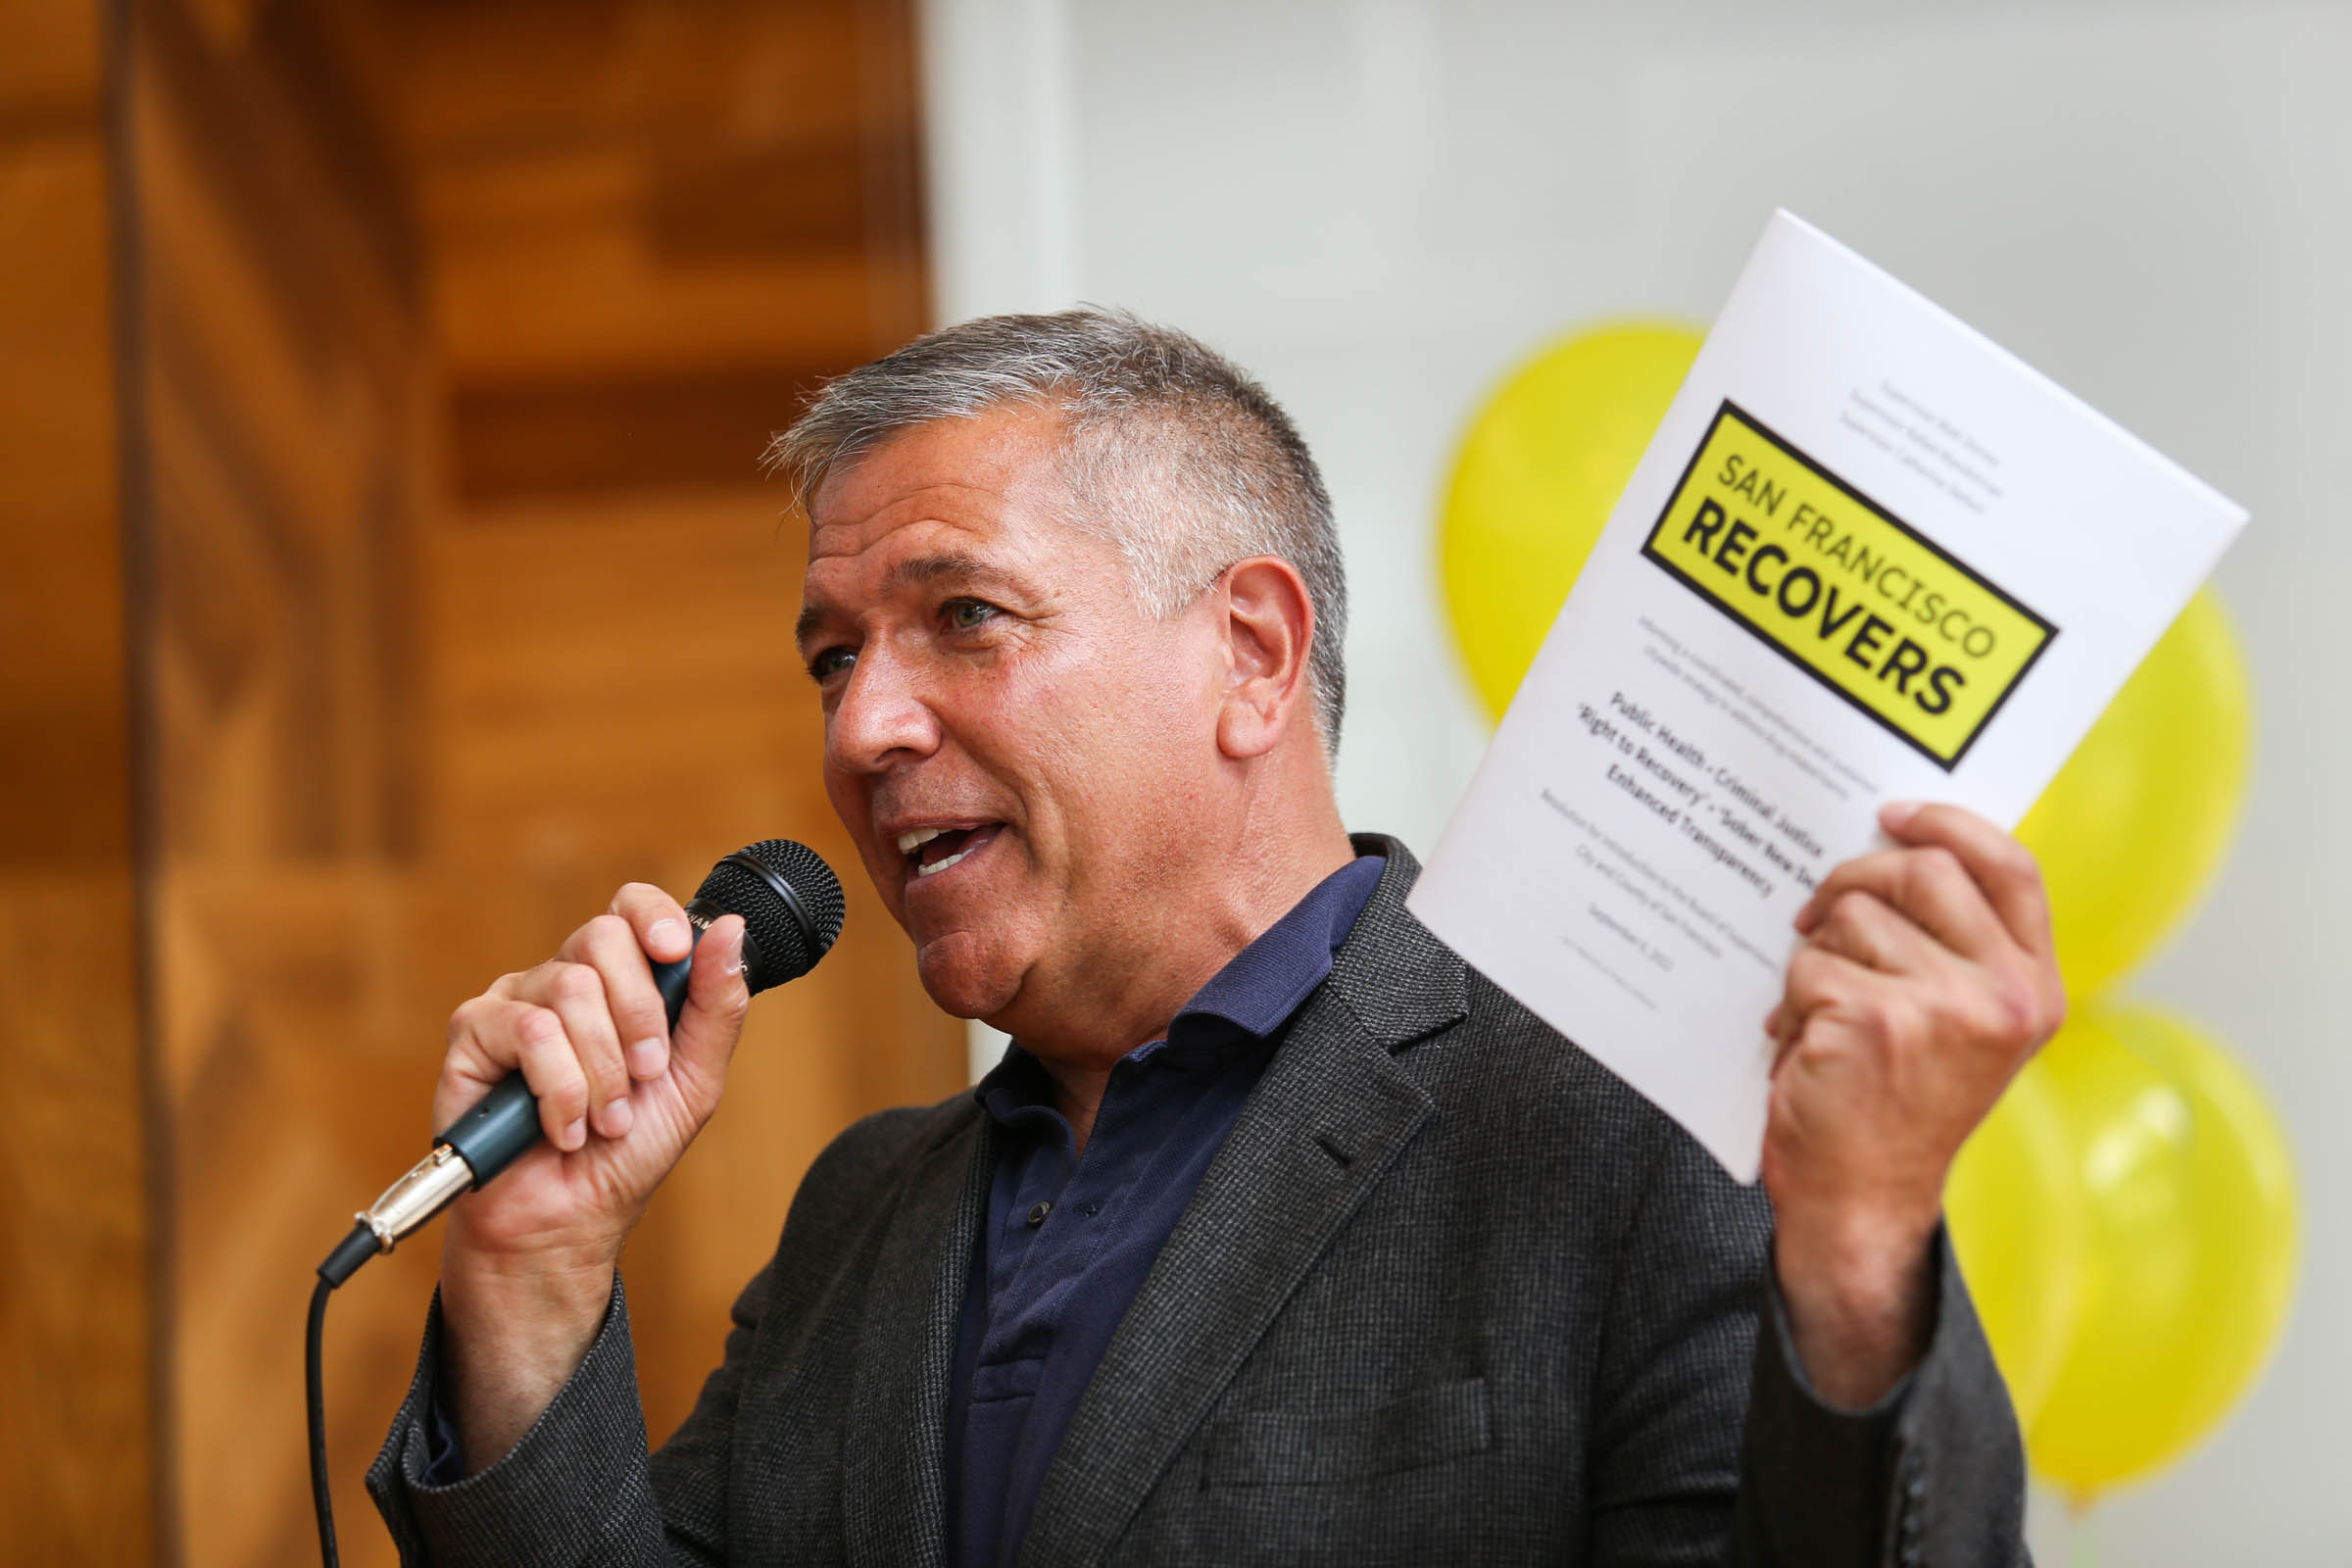 A man in a suit speaks into a microphone while holding up a document titled "San Francisco Recovers." Yellow balloons are visible in the blurred background.